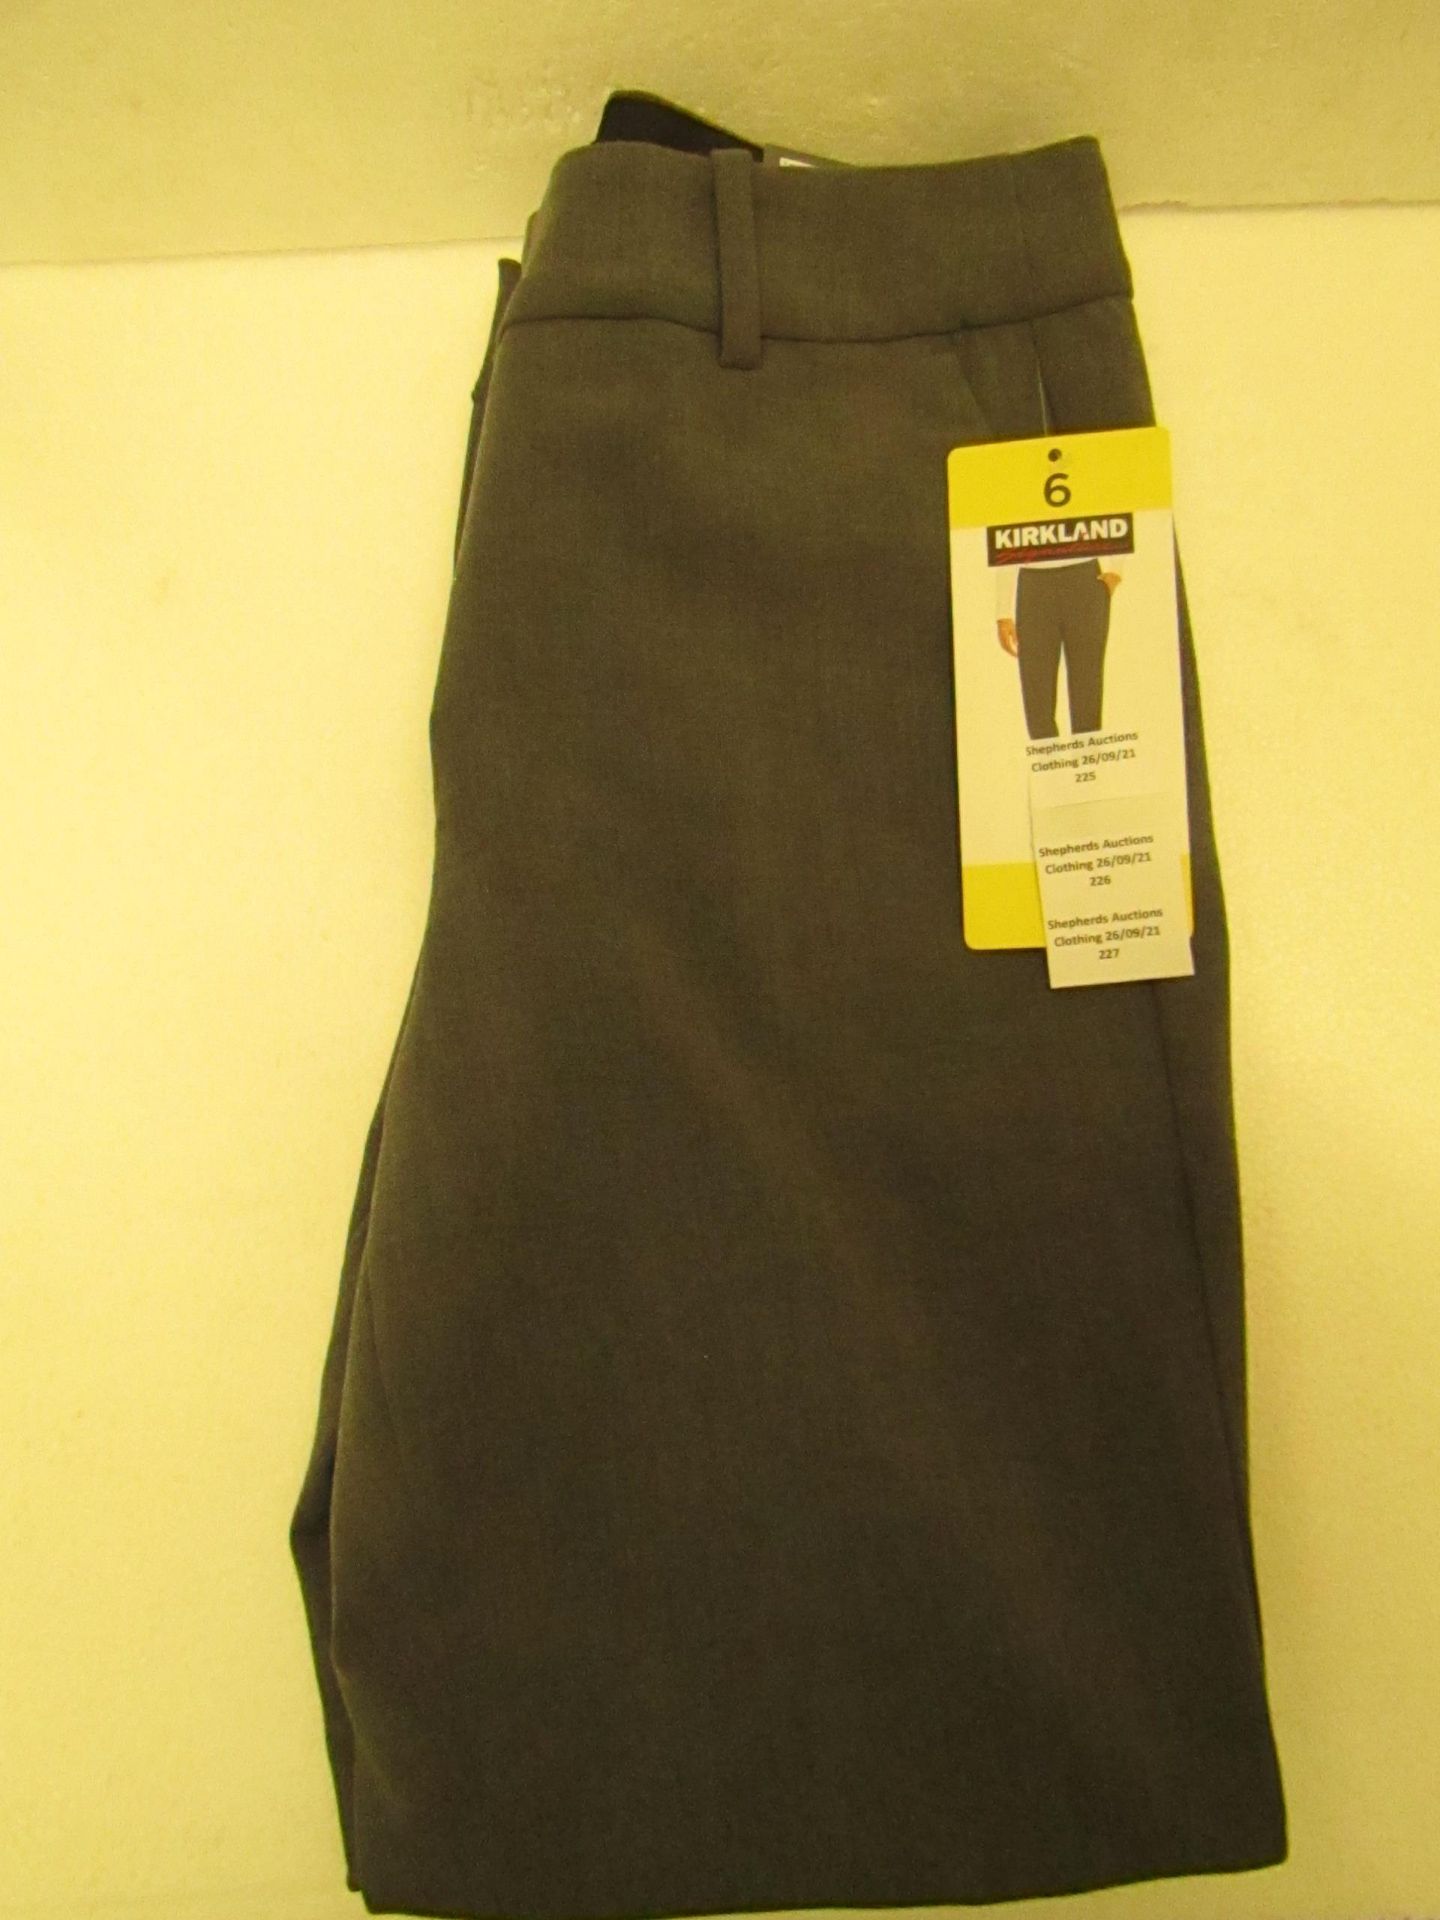 1X Kirkland Signature Ladies Pants - Size 6 - Grey - New with tags